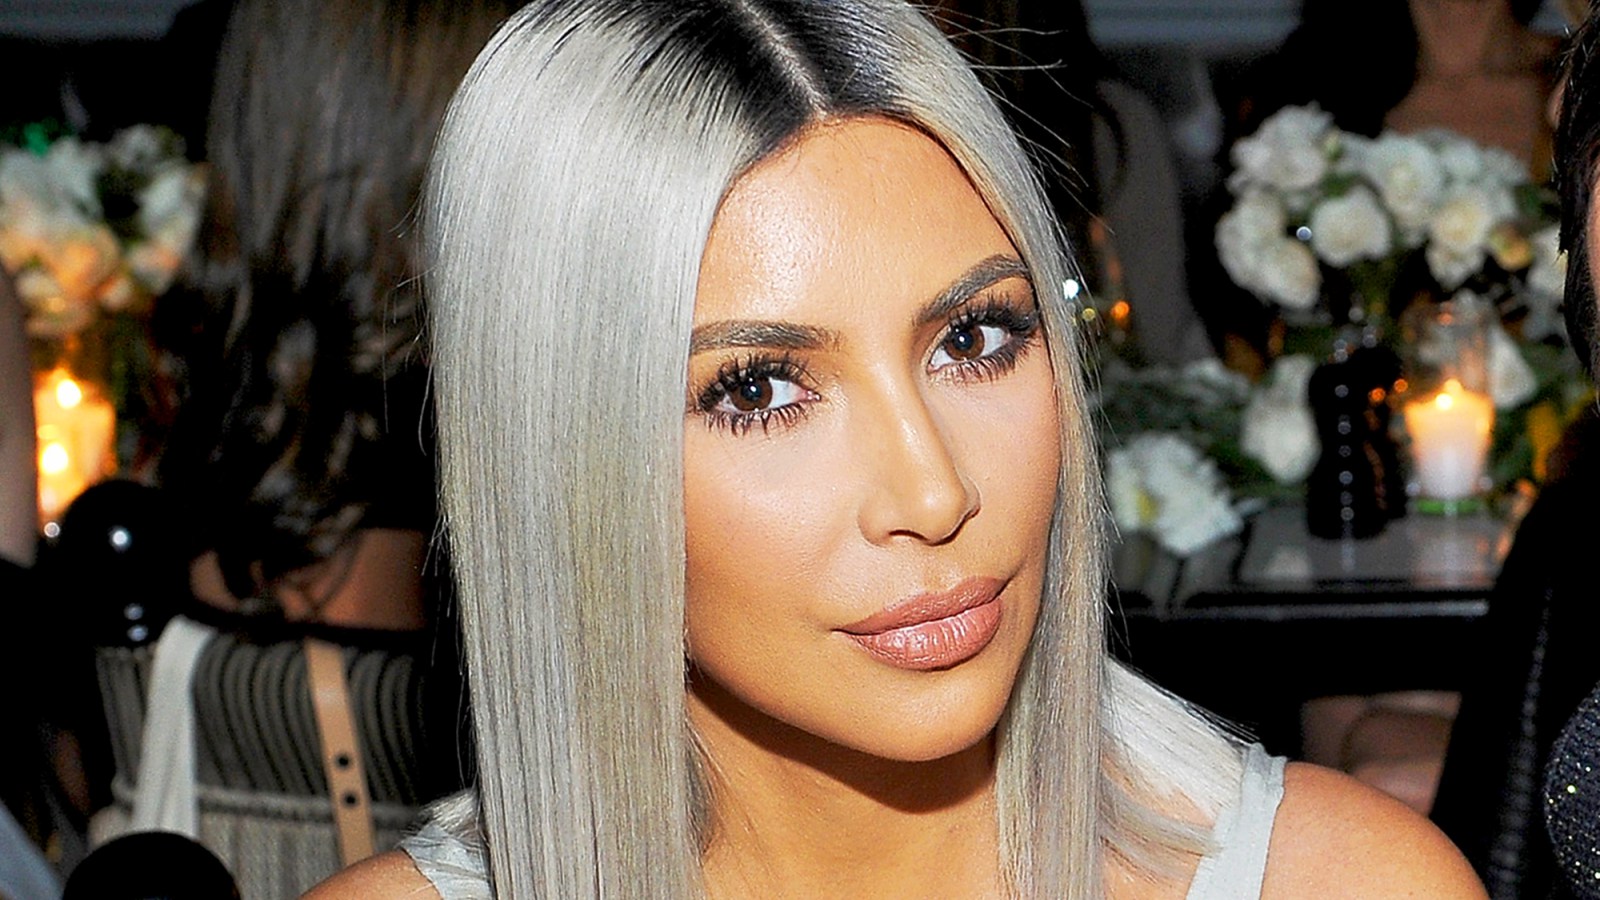 Kim Kardashian 1 1 Arena Pile Top 10 Female Celebrities with the Most Overrated Looks